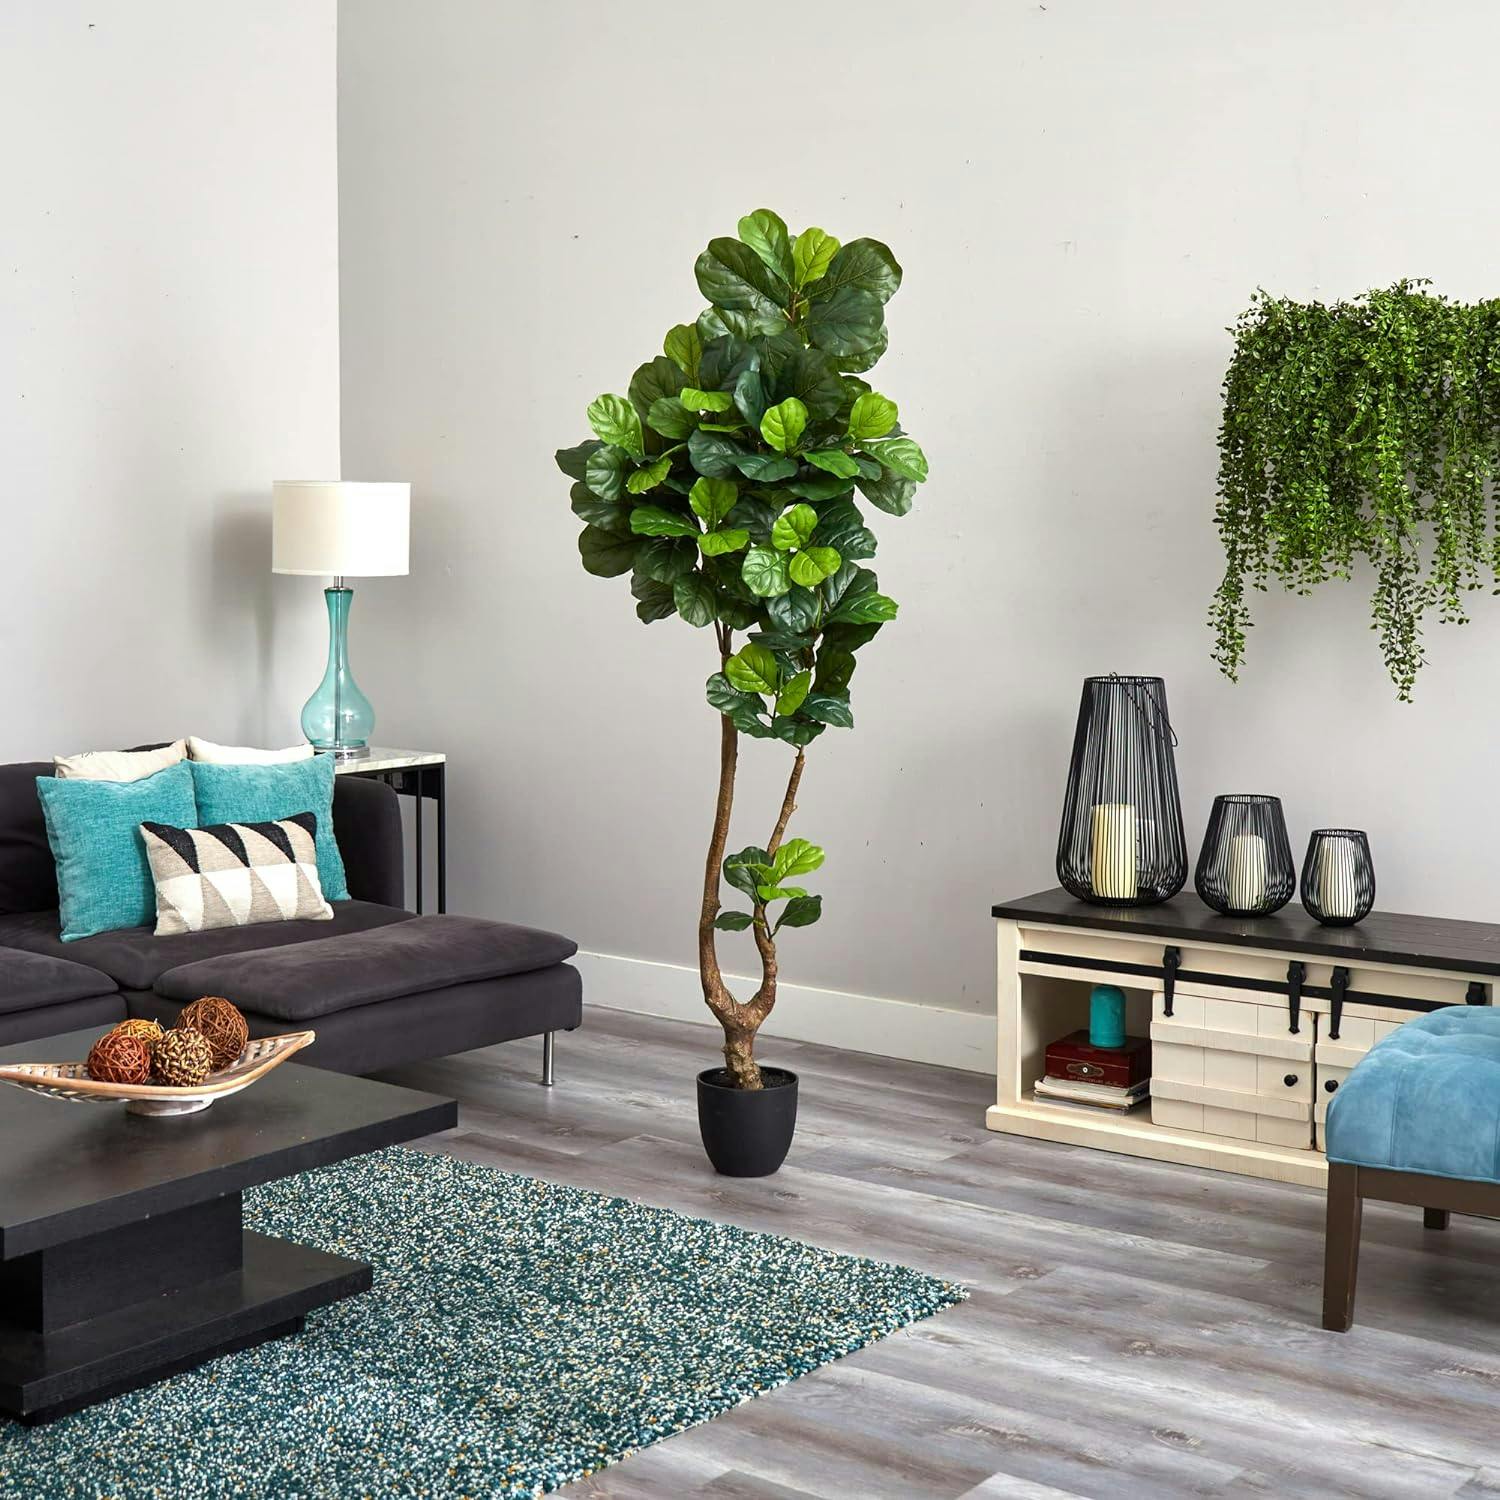 Lush Greenery 78'' Real-Touch Fiddle Leaf in Pot